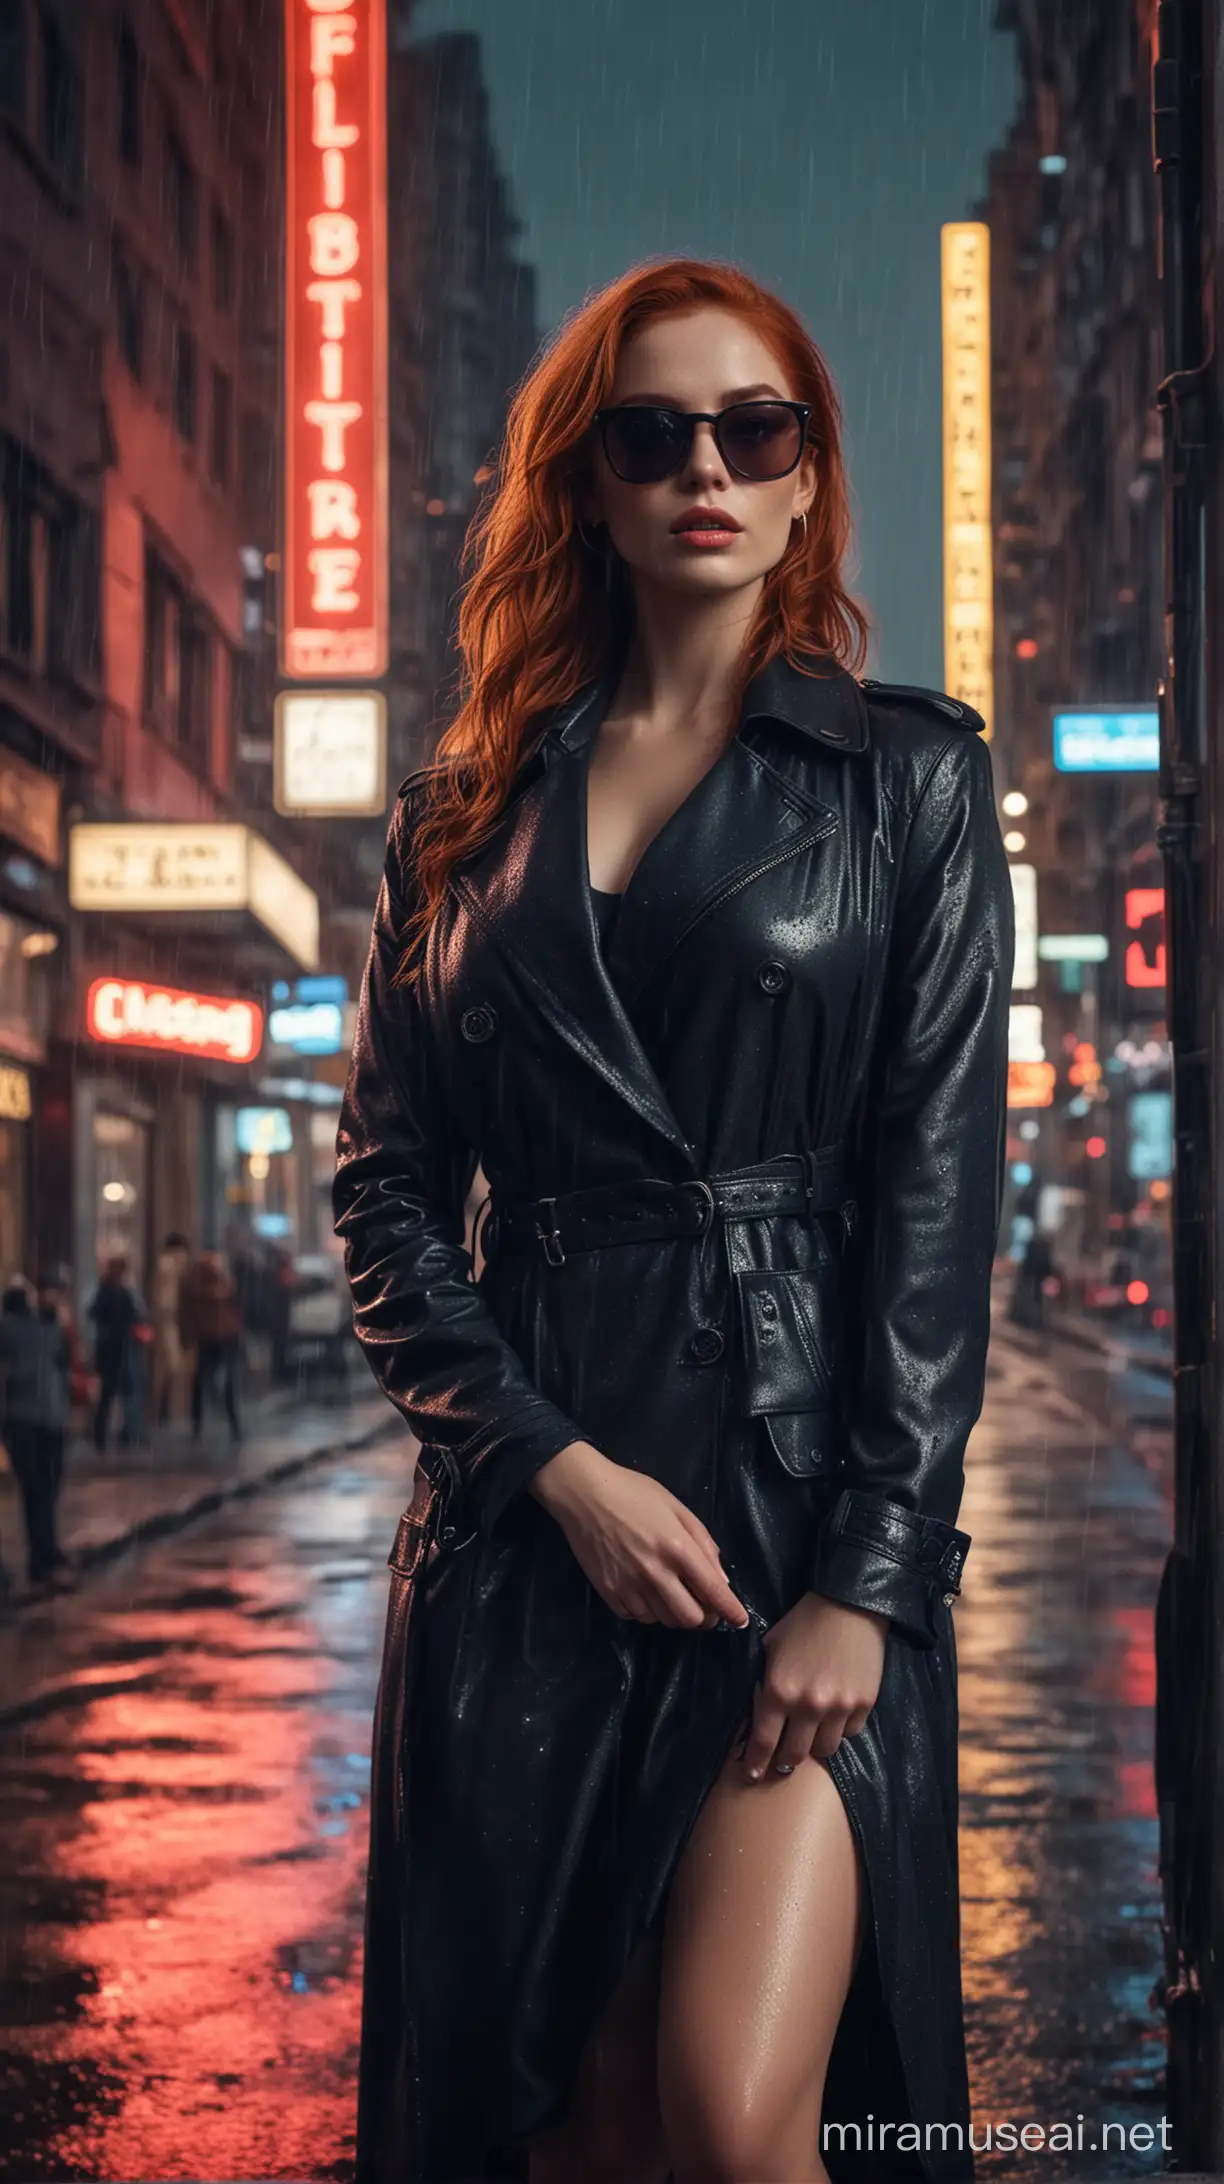 CrA captivating cinematic image of a stunning red-haired woman wearing sunglasses in a detective-style outfit. She stands confidently with her hand resting on her hip, holding a mysterious sign with intriguing captions: "@_fatos_desconhecidos__". The background is a dimly lit, rain-soaked cityscape with neon signs and a sense of intrigue. The overall atmosphere of the photo is a blend of mystery, action, and urban noir. Image with size 4 x 4 